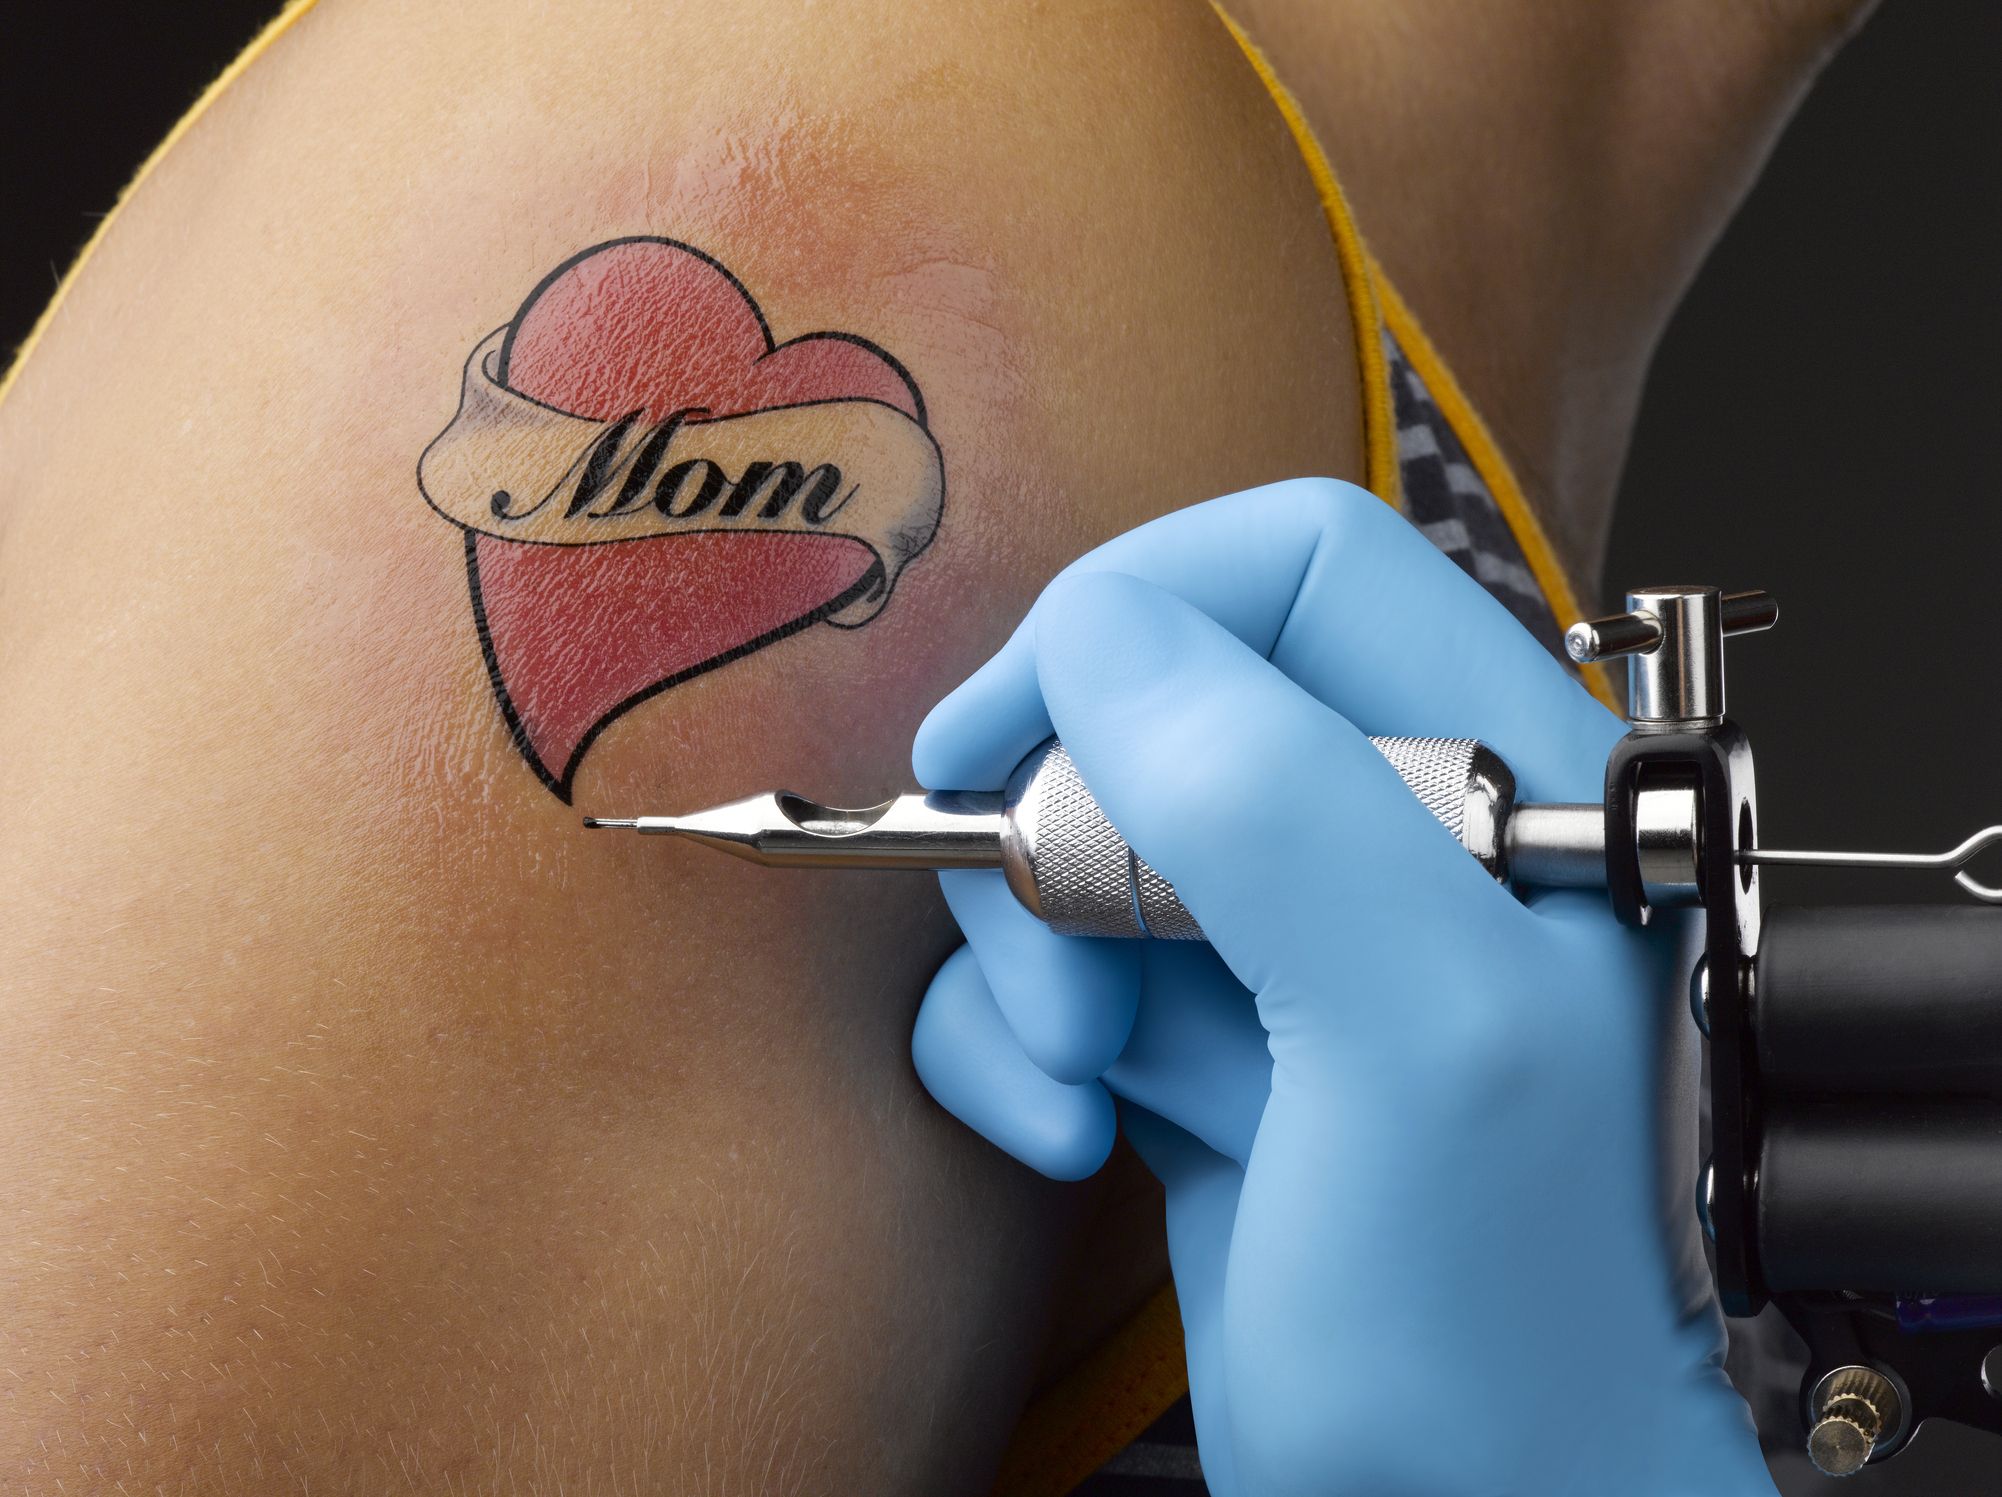 10 Minimalist MotherDaughter Tattoo Ideas to Try Out